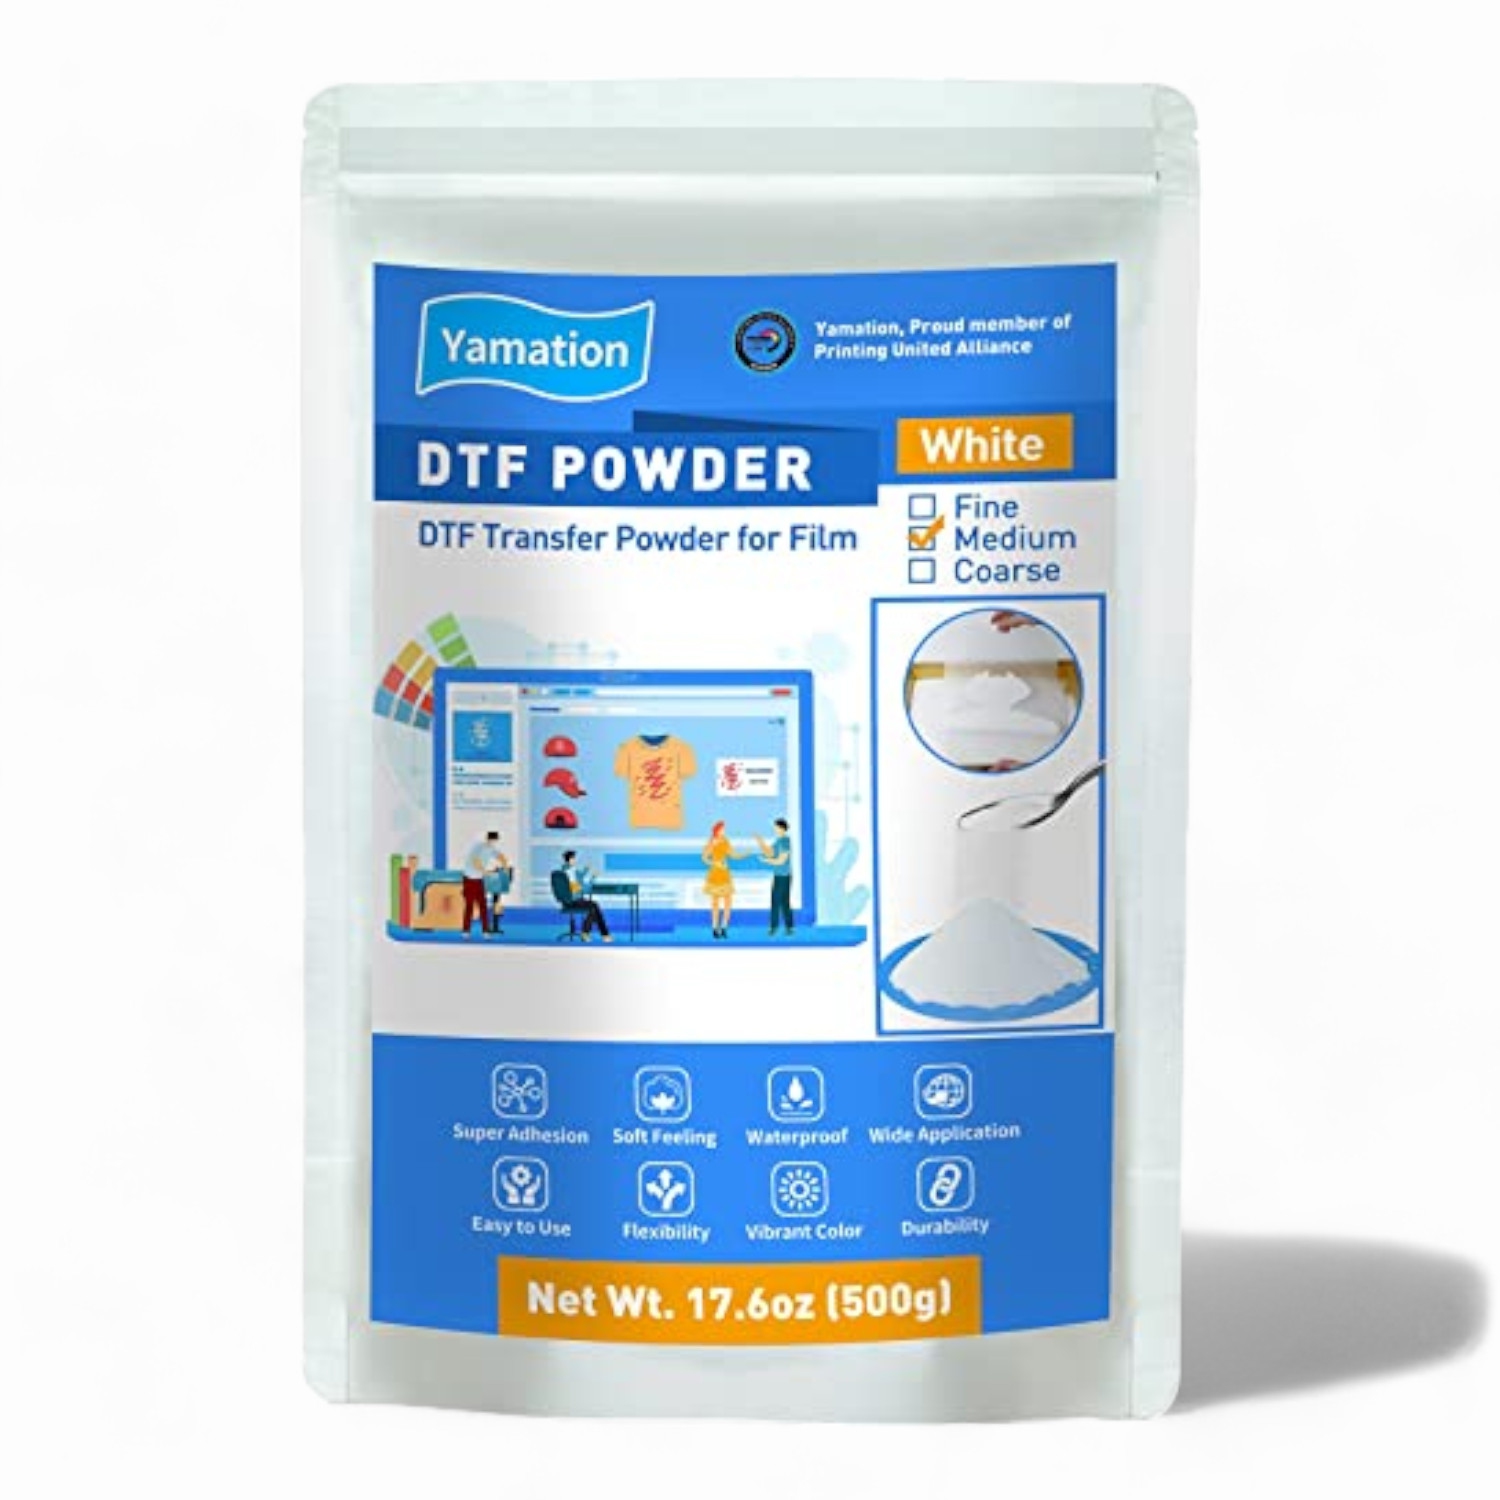 DTF Fusion Adhesive: Ultra-White 500g | 1.1lb | All-in-One DTF Powder for Vibrant Digital Prints on T-Shirts & Textiles | Compatible with DTF Printers | Includes PET Film & Ink